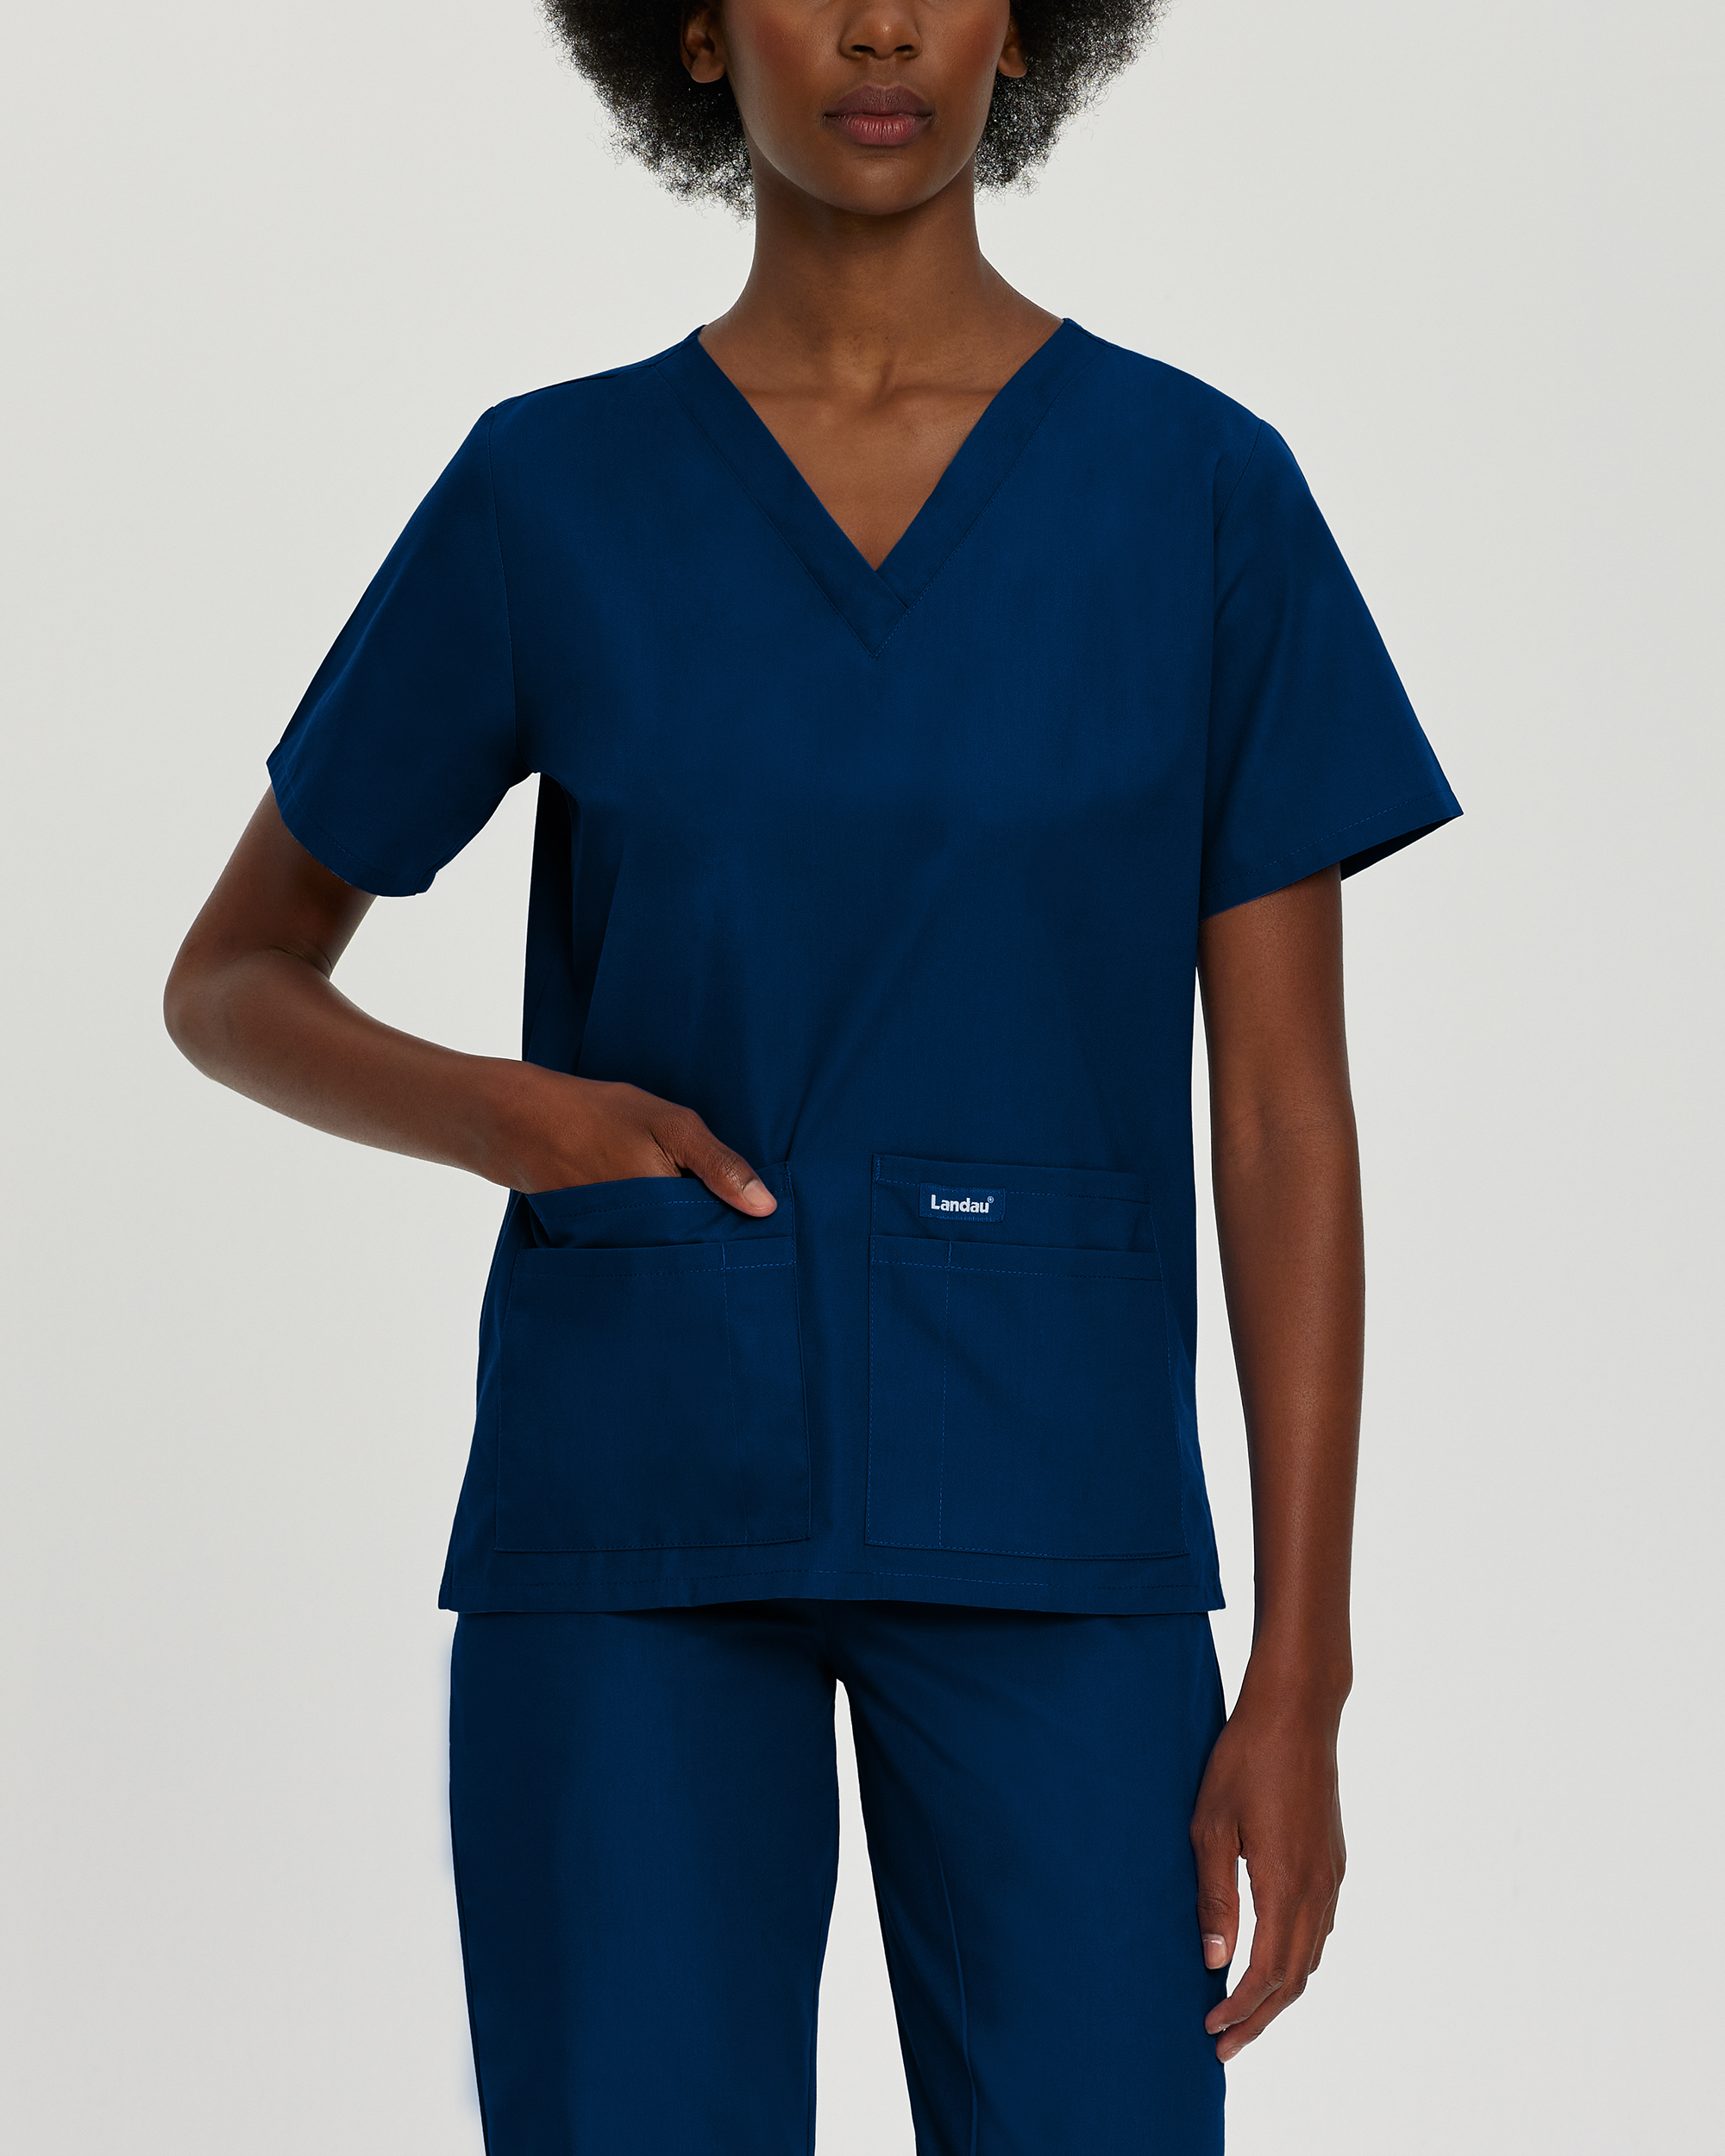 What is the fabric composition of Landau's scrub tops?